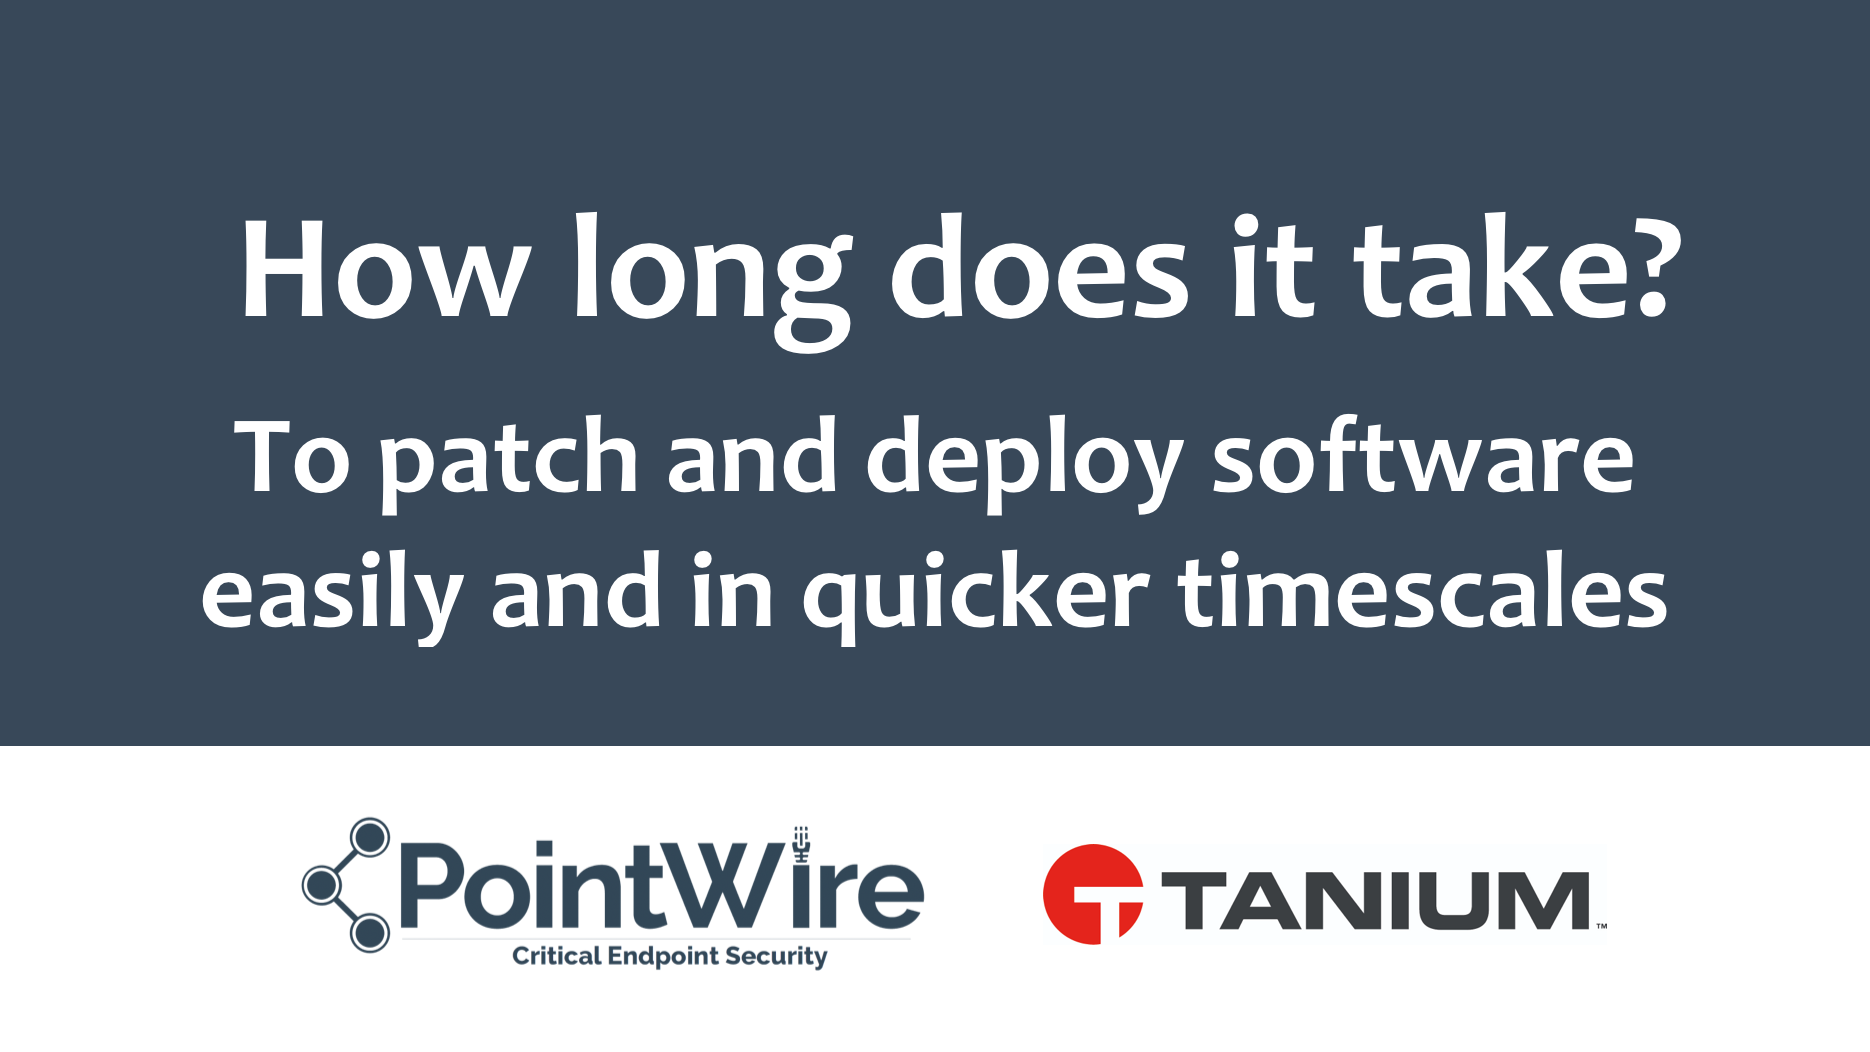 How long does it take? To patch and deploy software